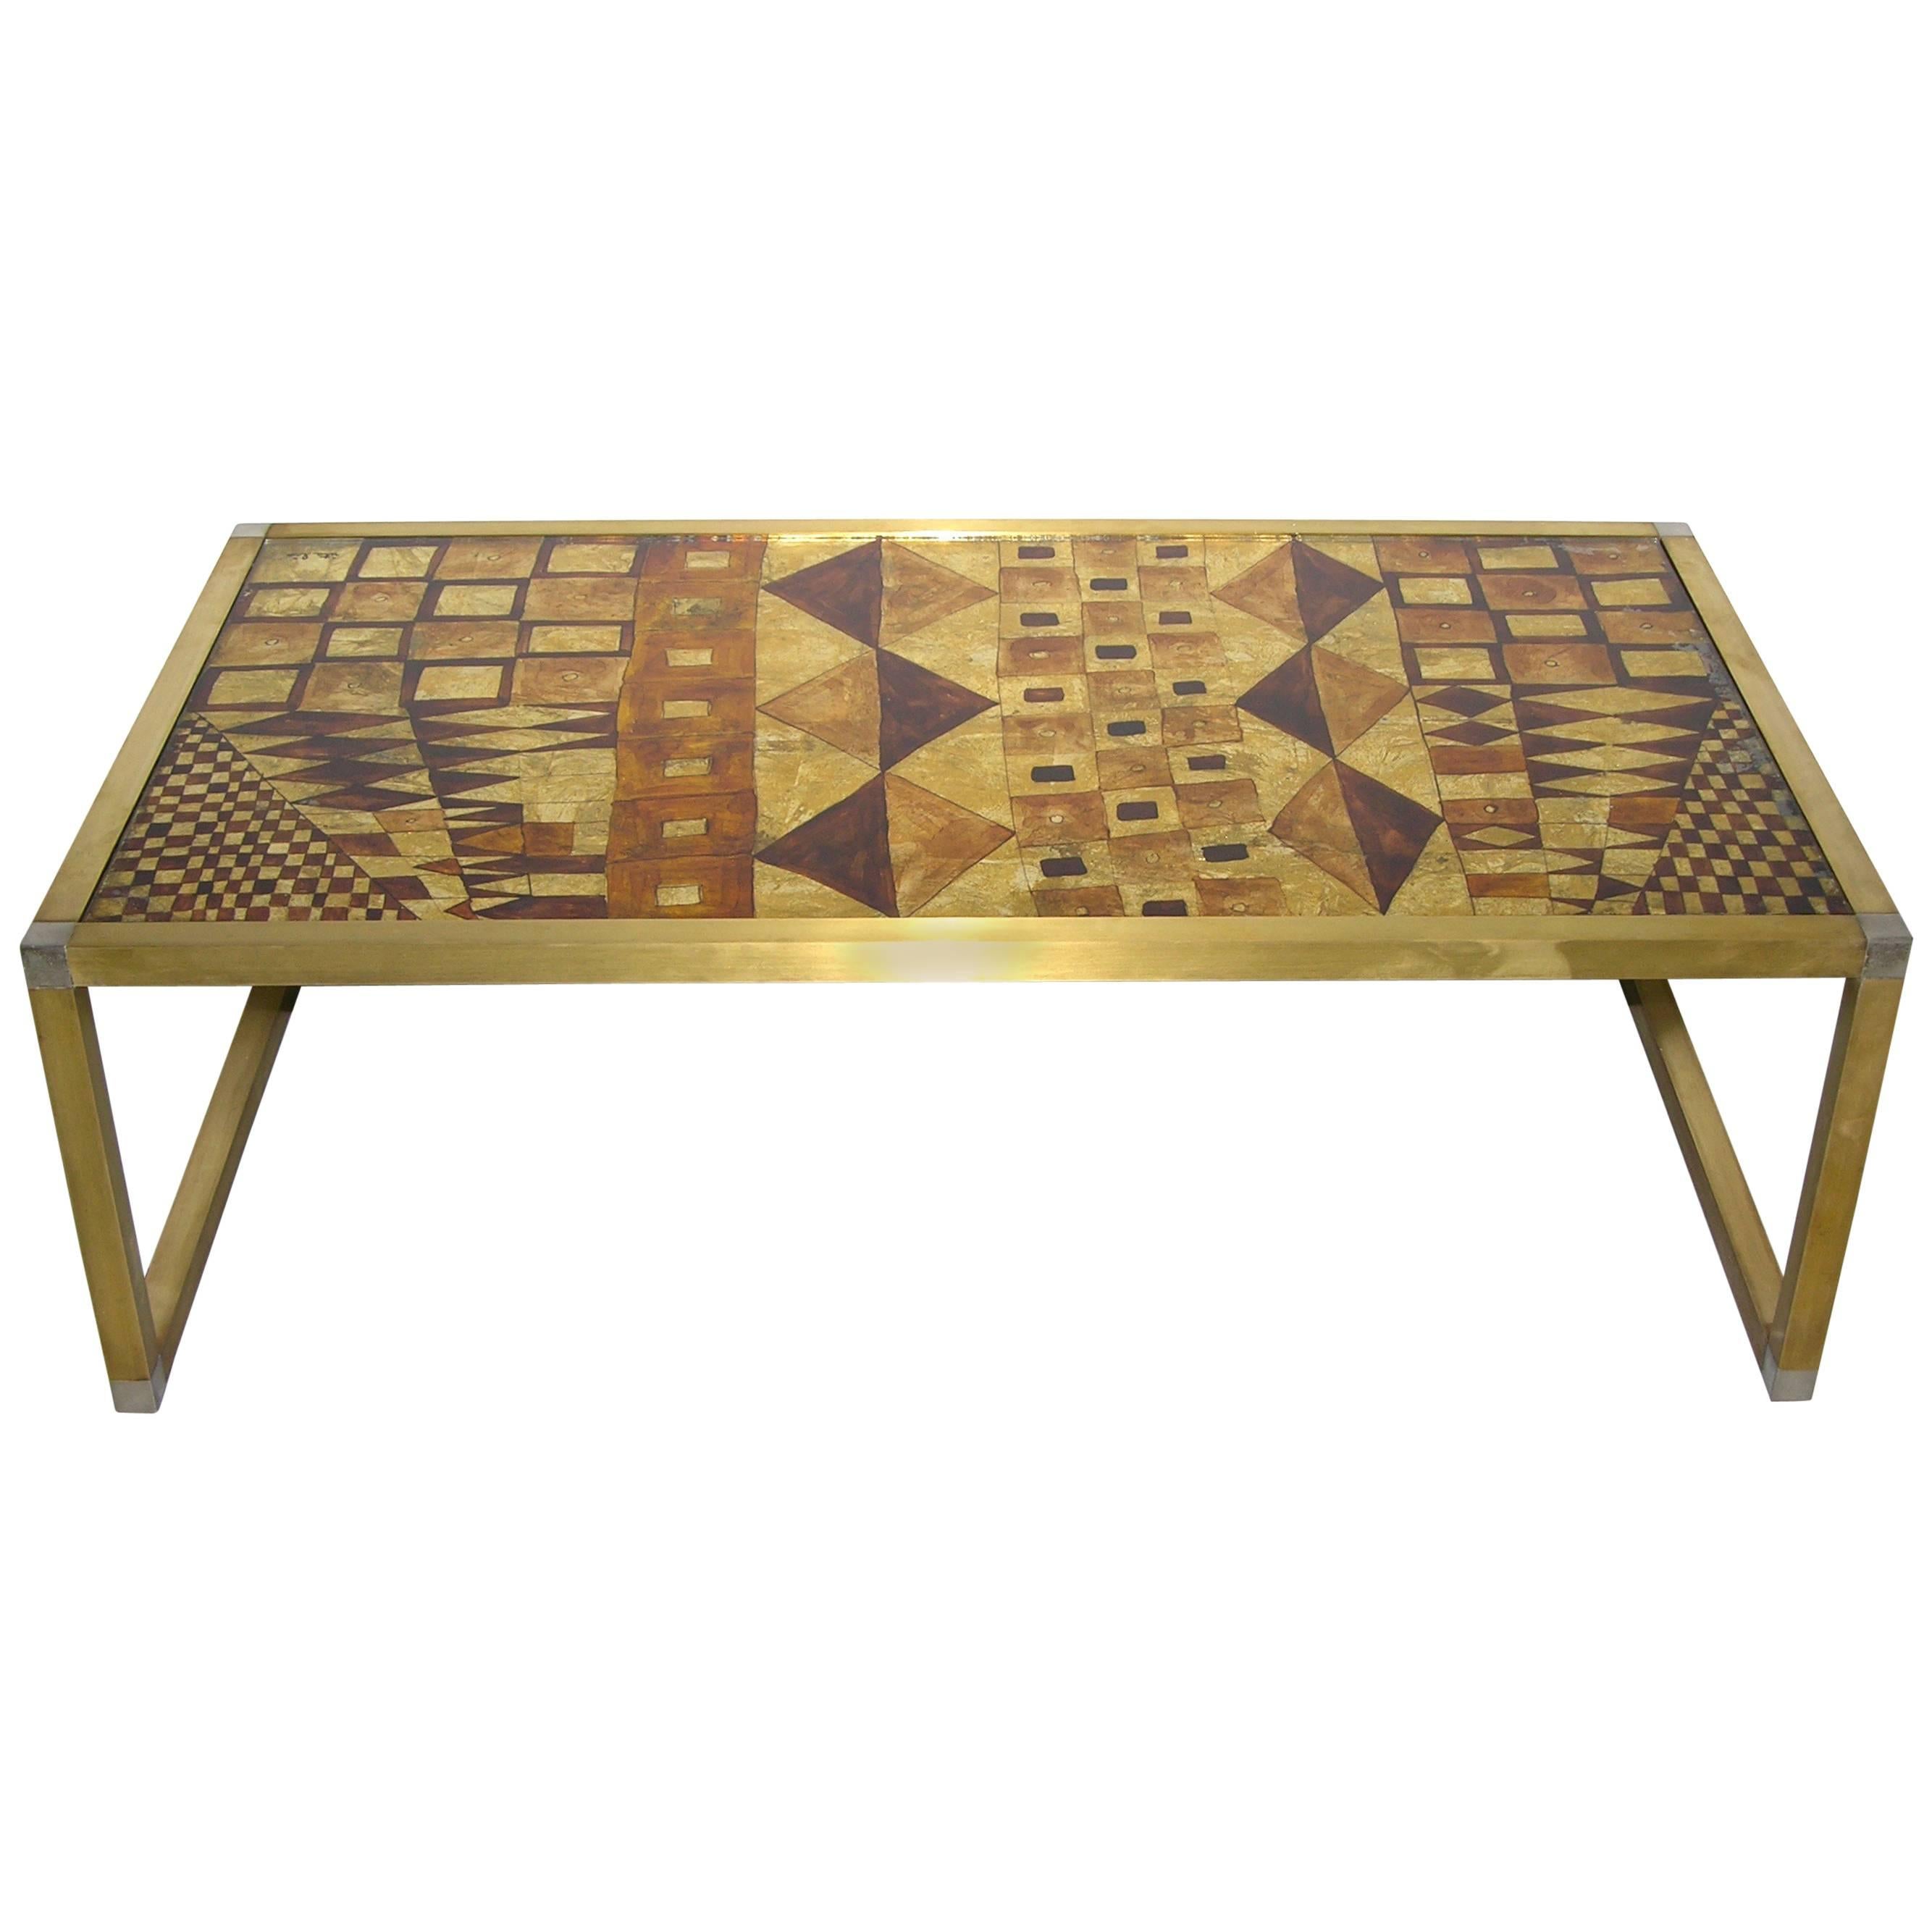 1970s Italian Art Deco Abstract Design Brass Coffee/Sofa Table with Gold Leaf